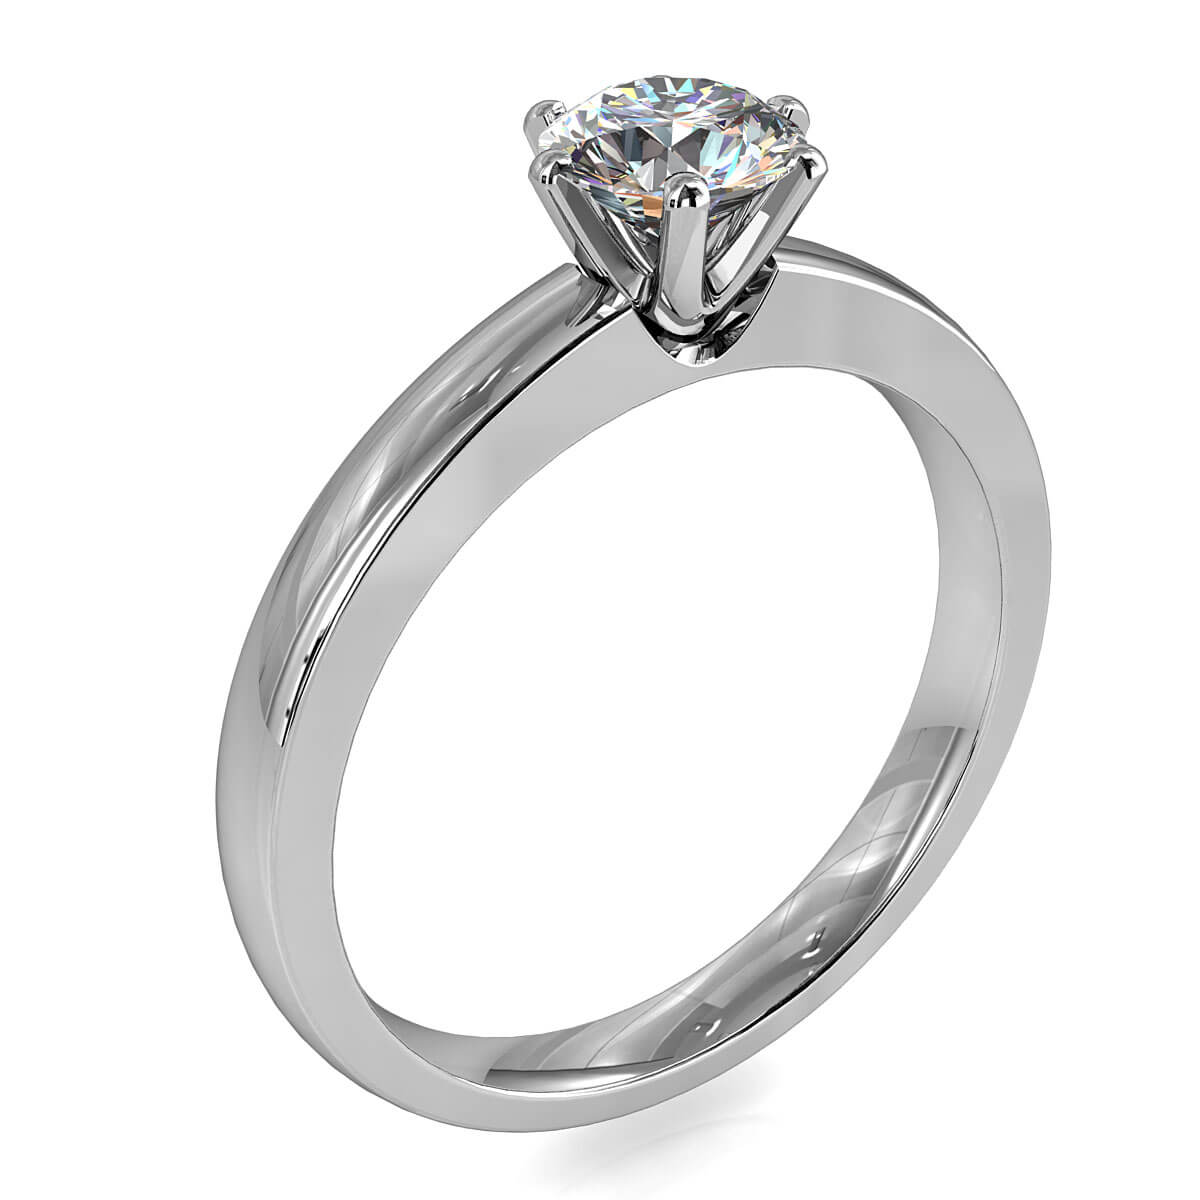 Round Brilliant Cut Solitaire Diamond Engagement Ring, 6 Offset Claws Set on Wide Straight Flat Band.